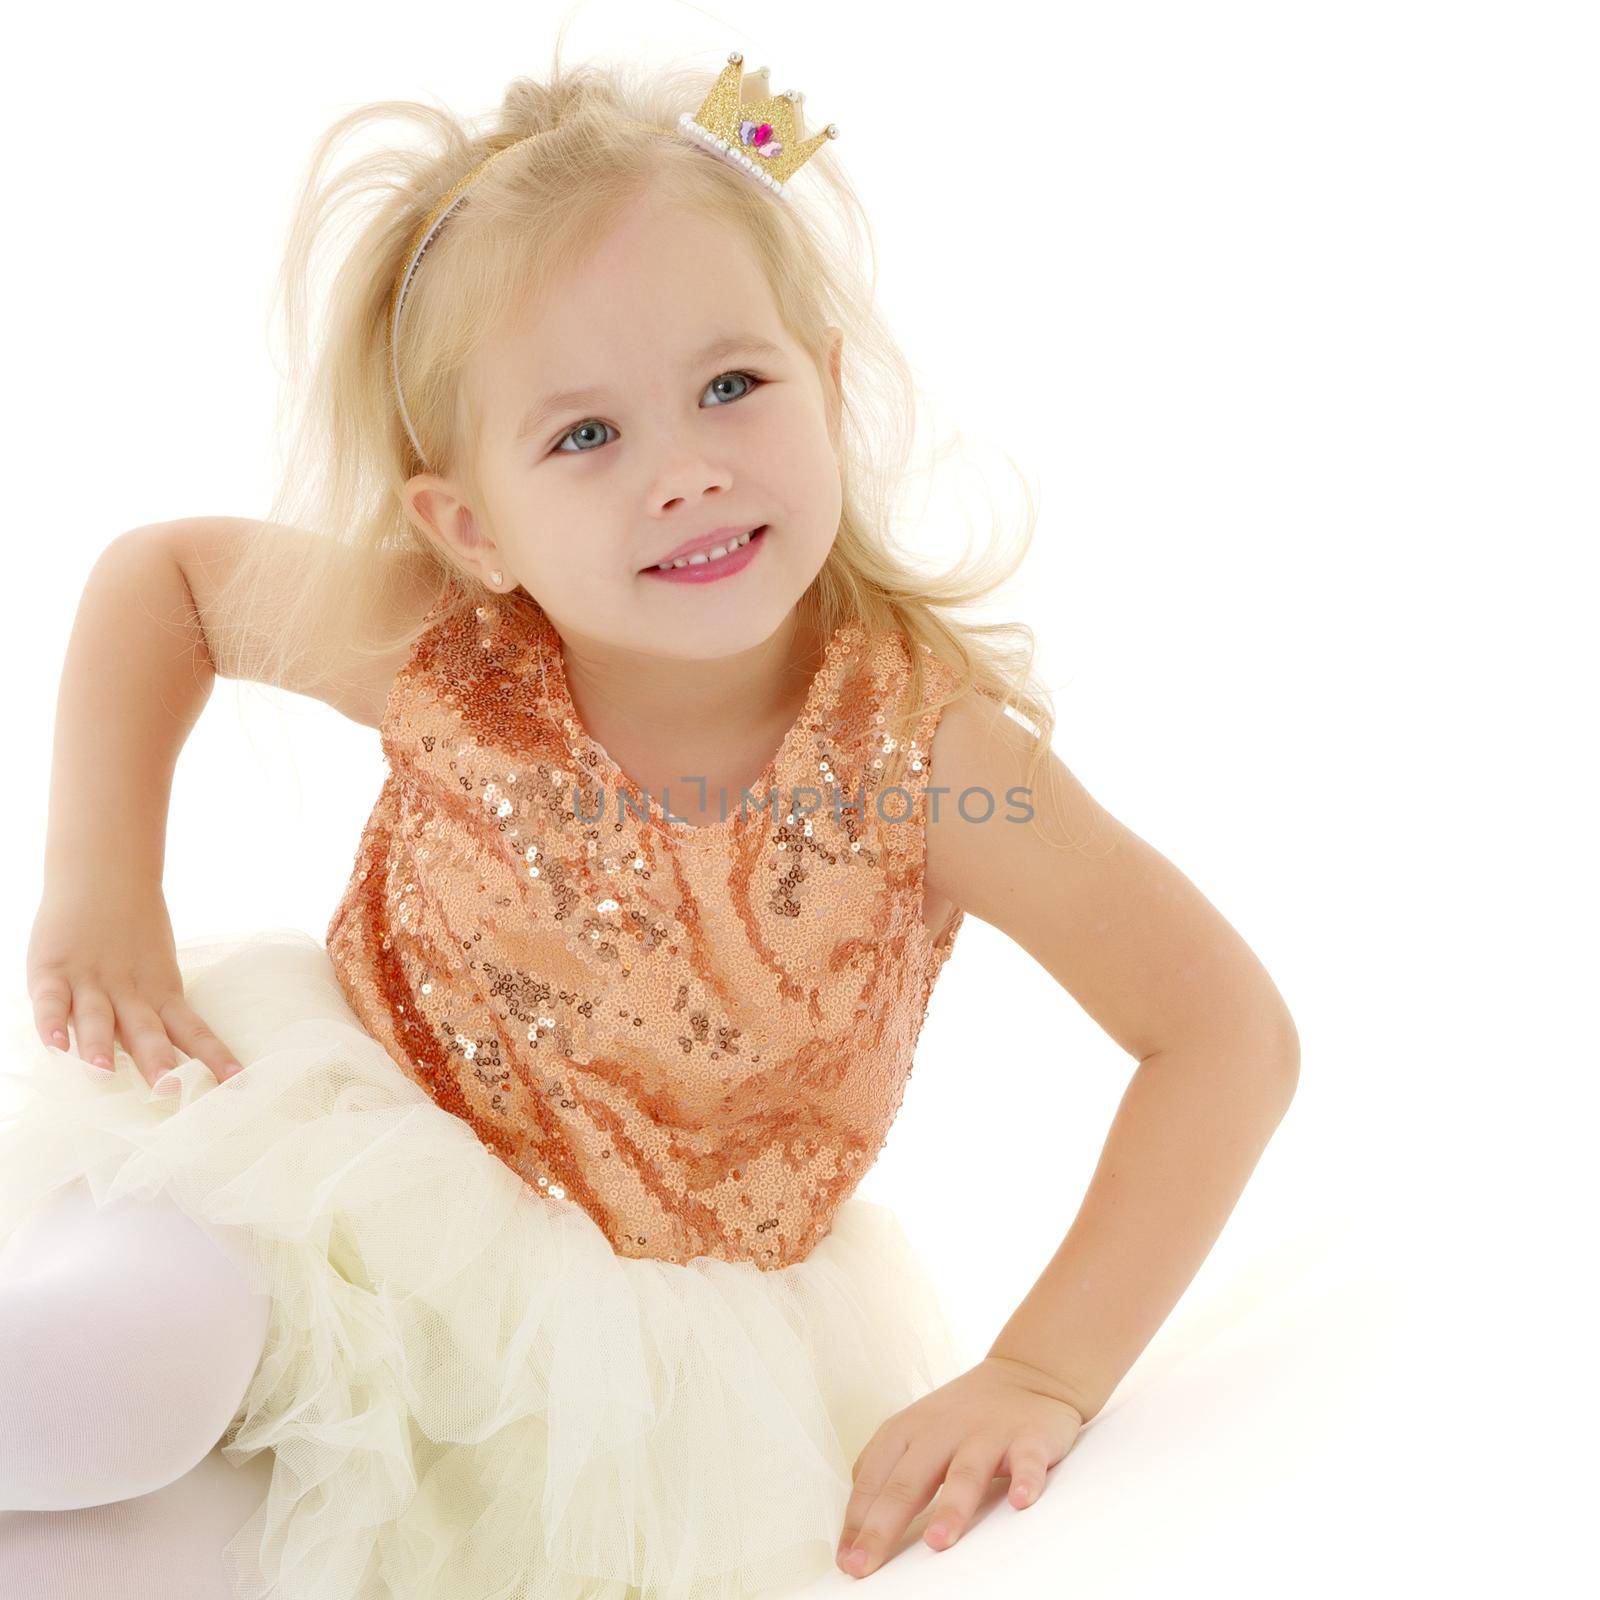 Cute little girl playing in the studio on the hill. Cyclorama. Isolated on white background.